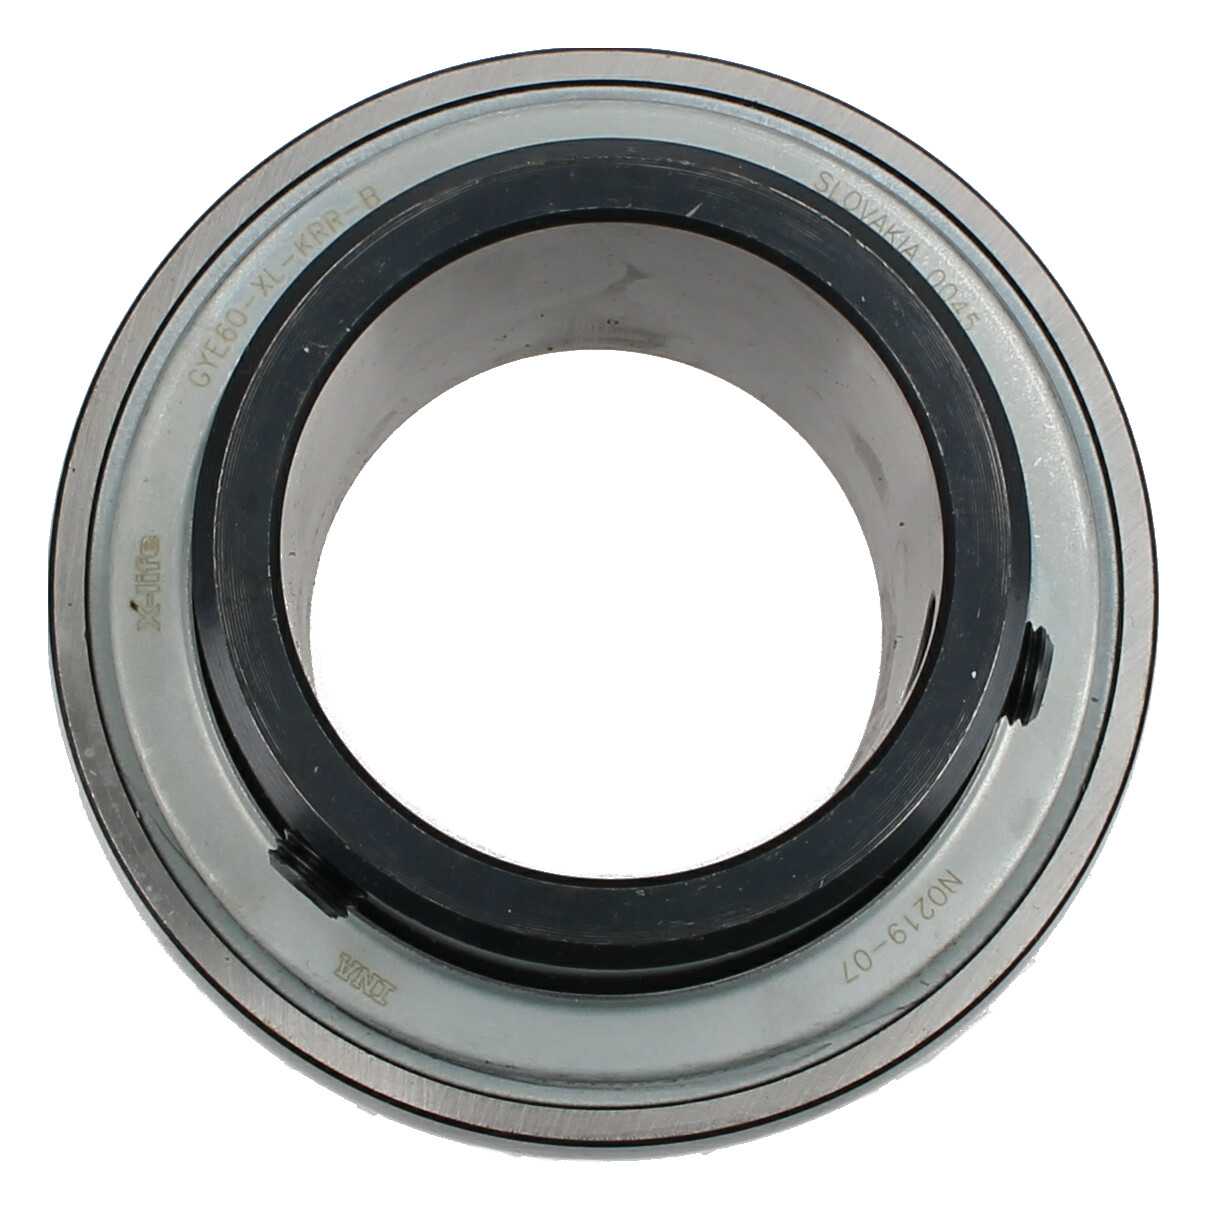 INSERTABLE BEARING GYE60- XL-KRR-B INA (WITHOUT PACKAGING)